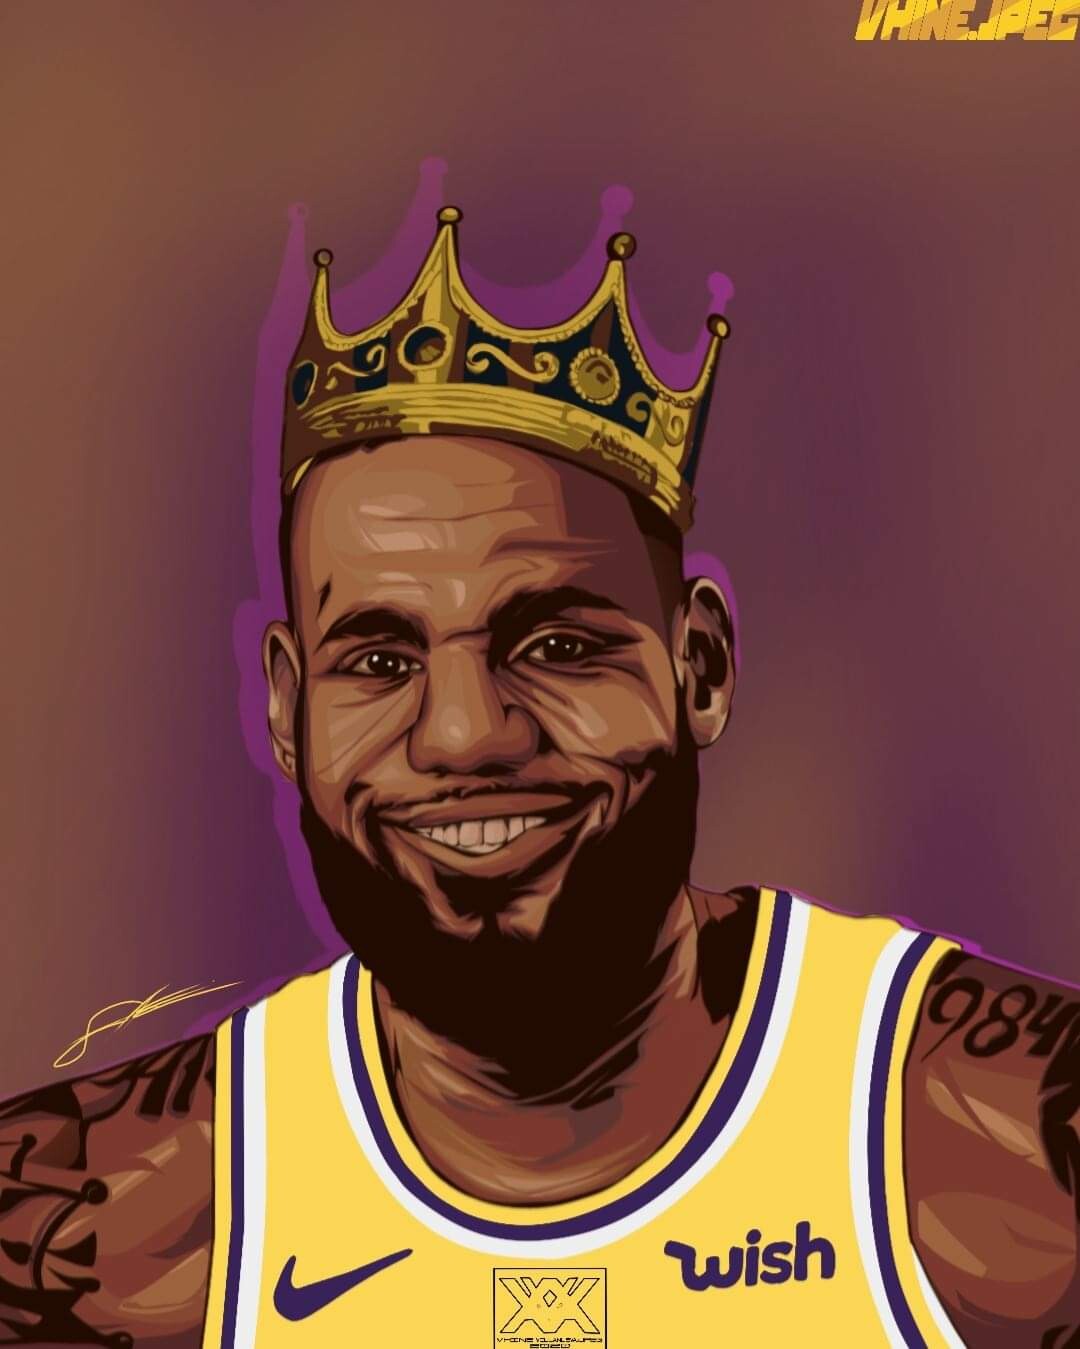 Lebron James King with Crown Portrait Fan Art Painting Style Digital Image  .PNG file